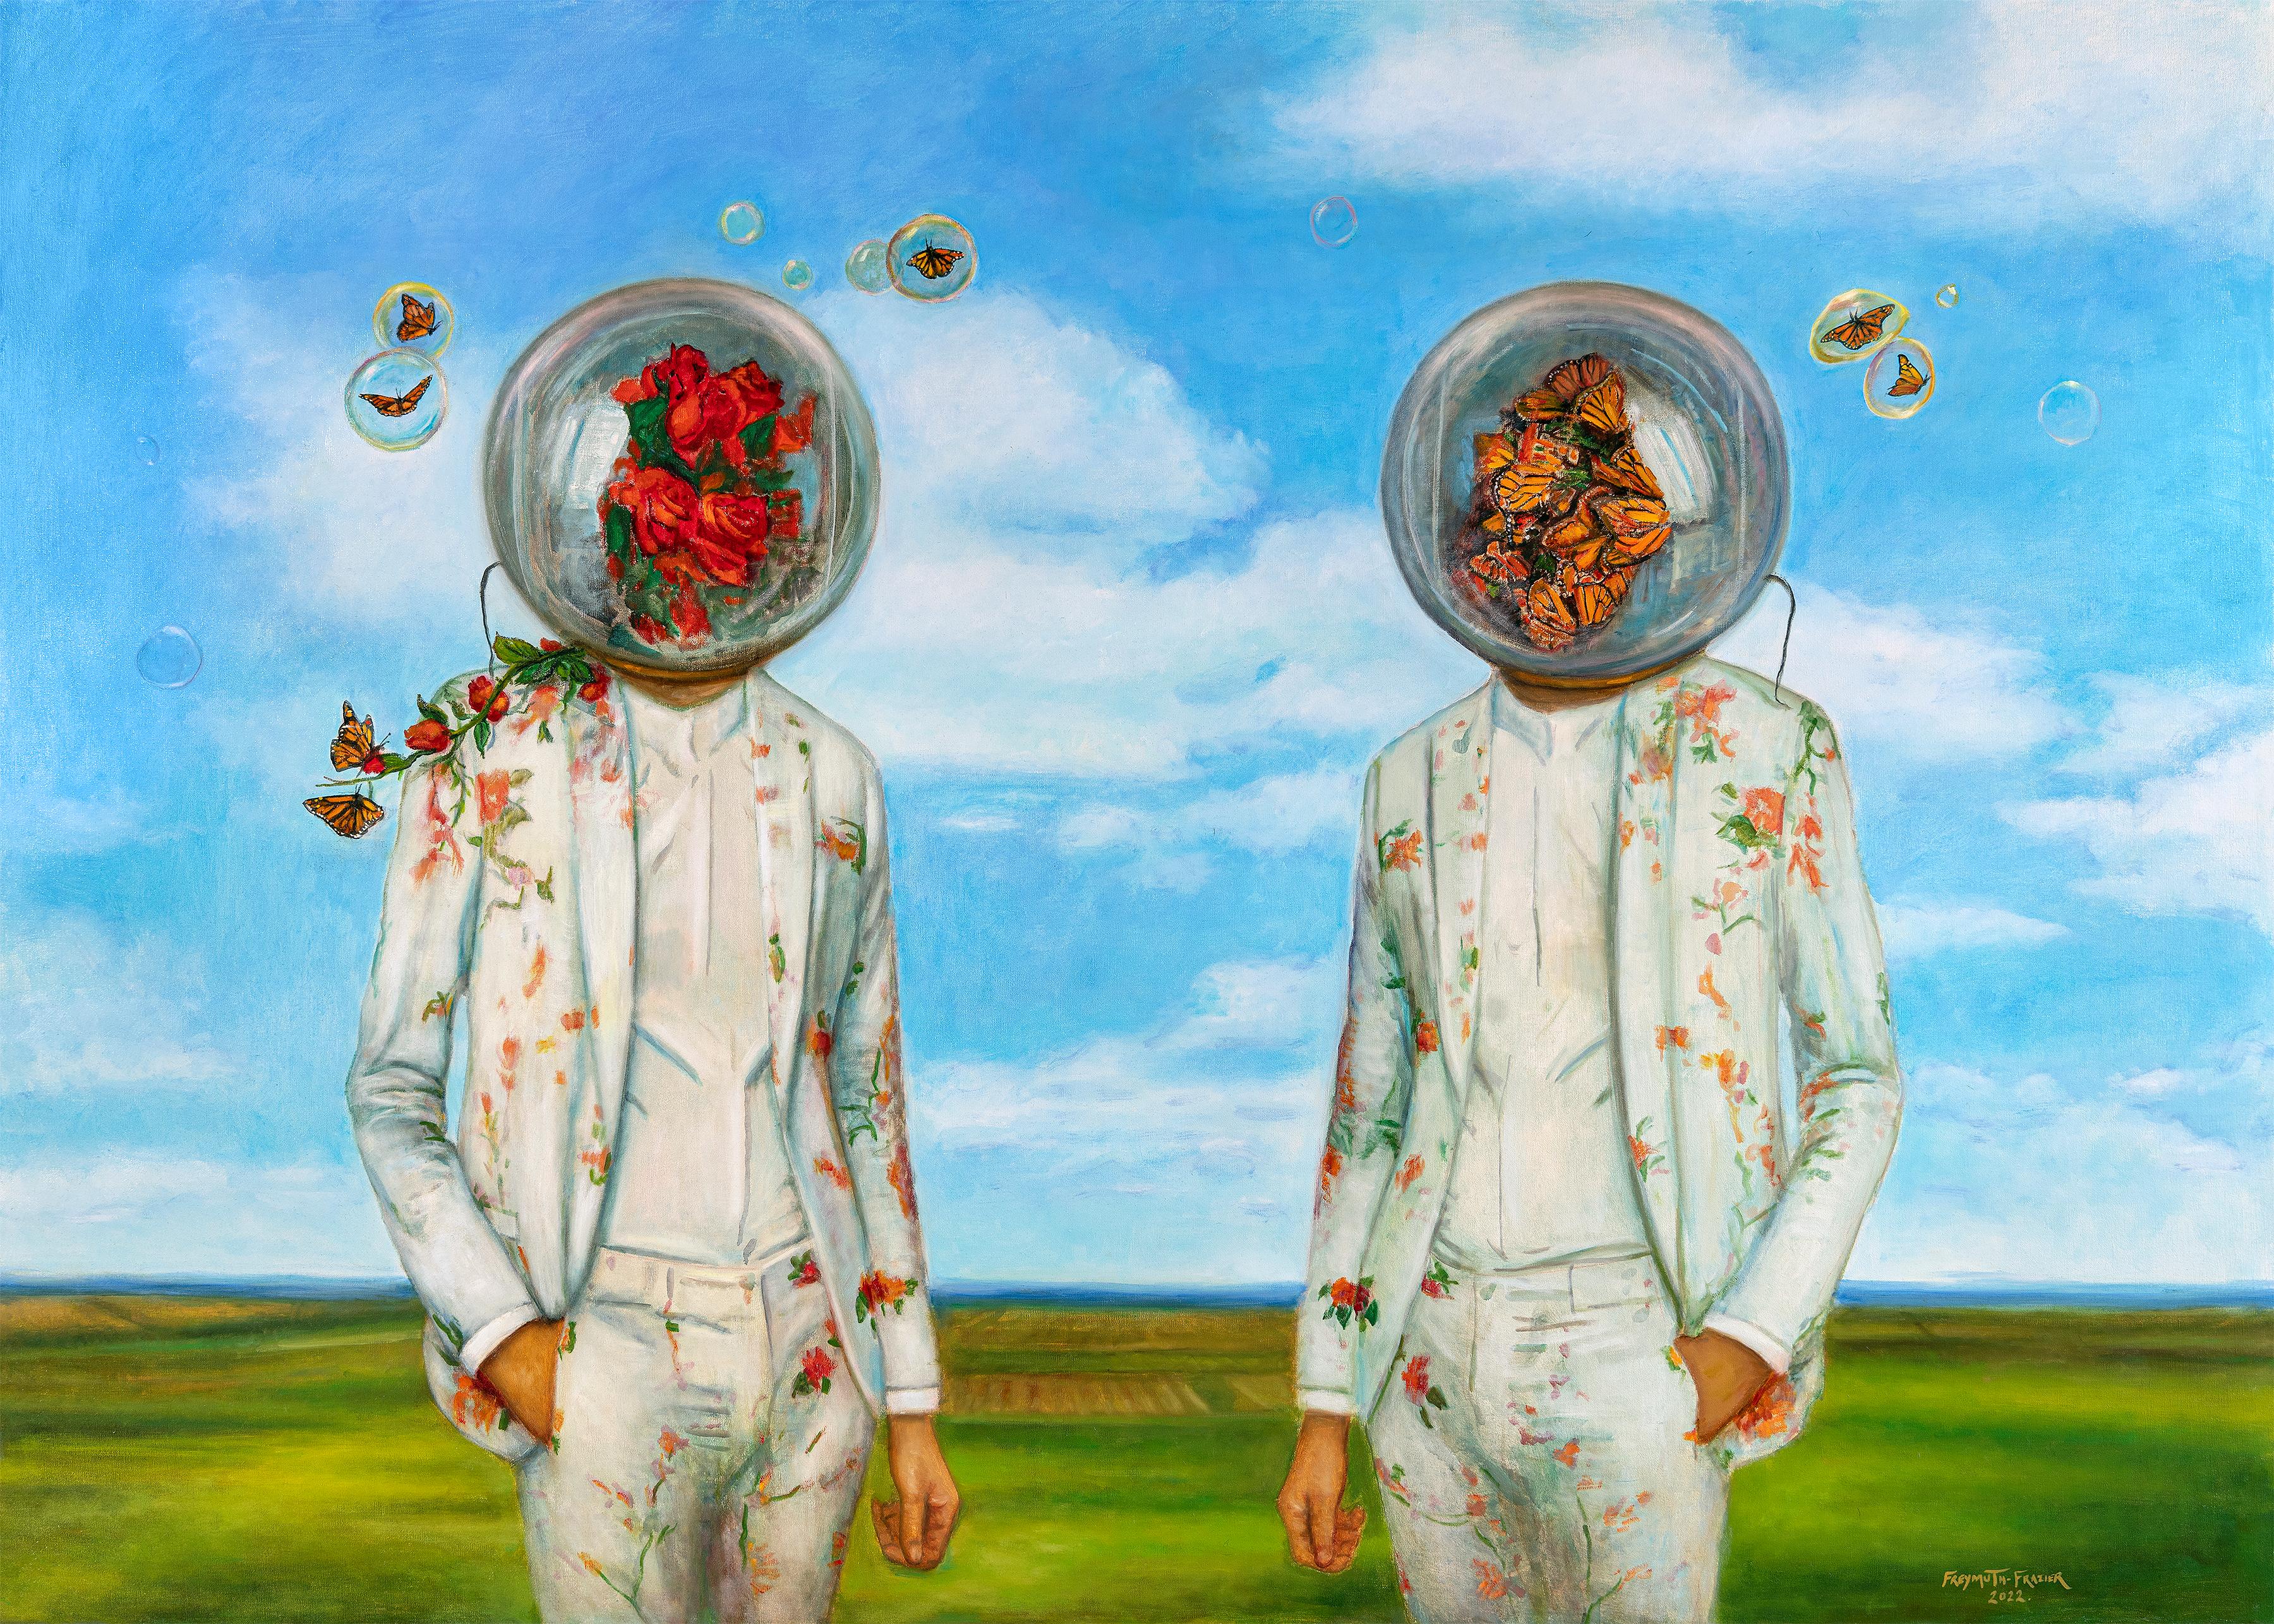 Rose Freymuth-Frazier Animal Painting - Pollinators - Two Figures in Flower Suits, Surrounded by Butterflies, Bright Sky